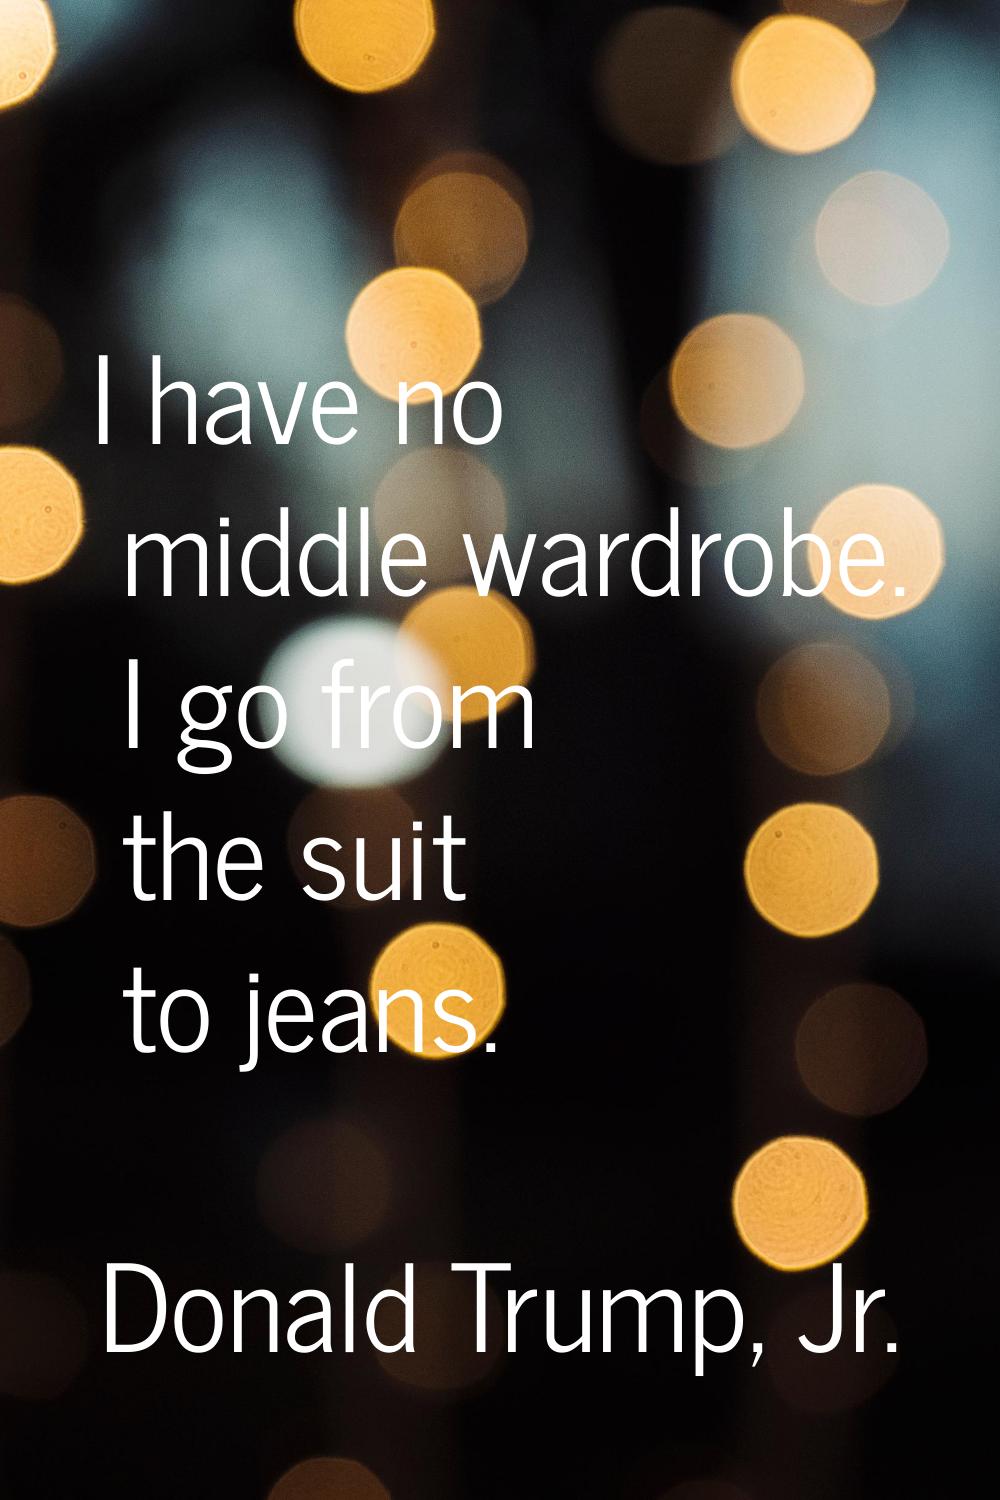 I have no middle wardrobe. I go from the suit to jeans.